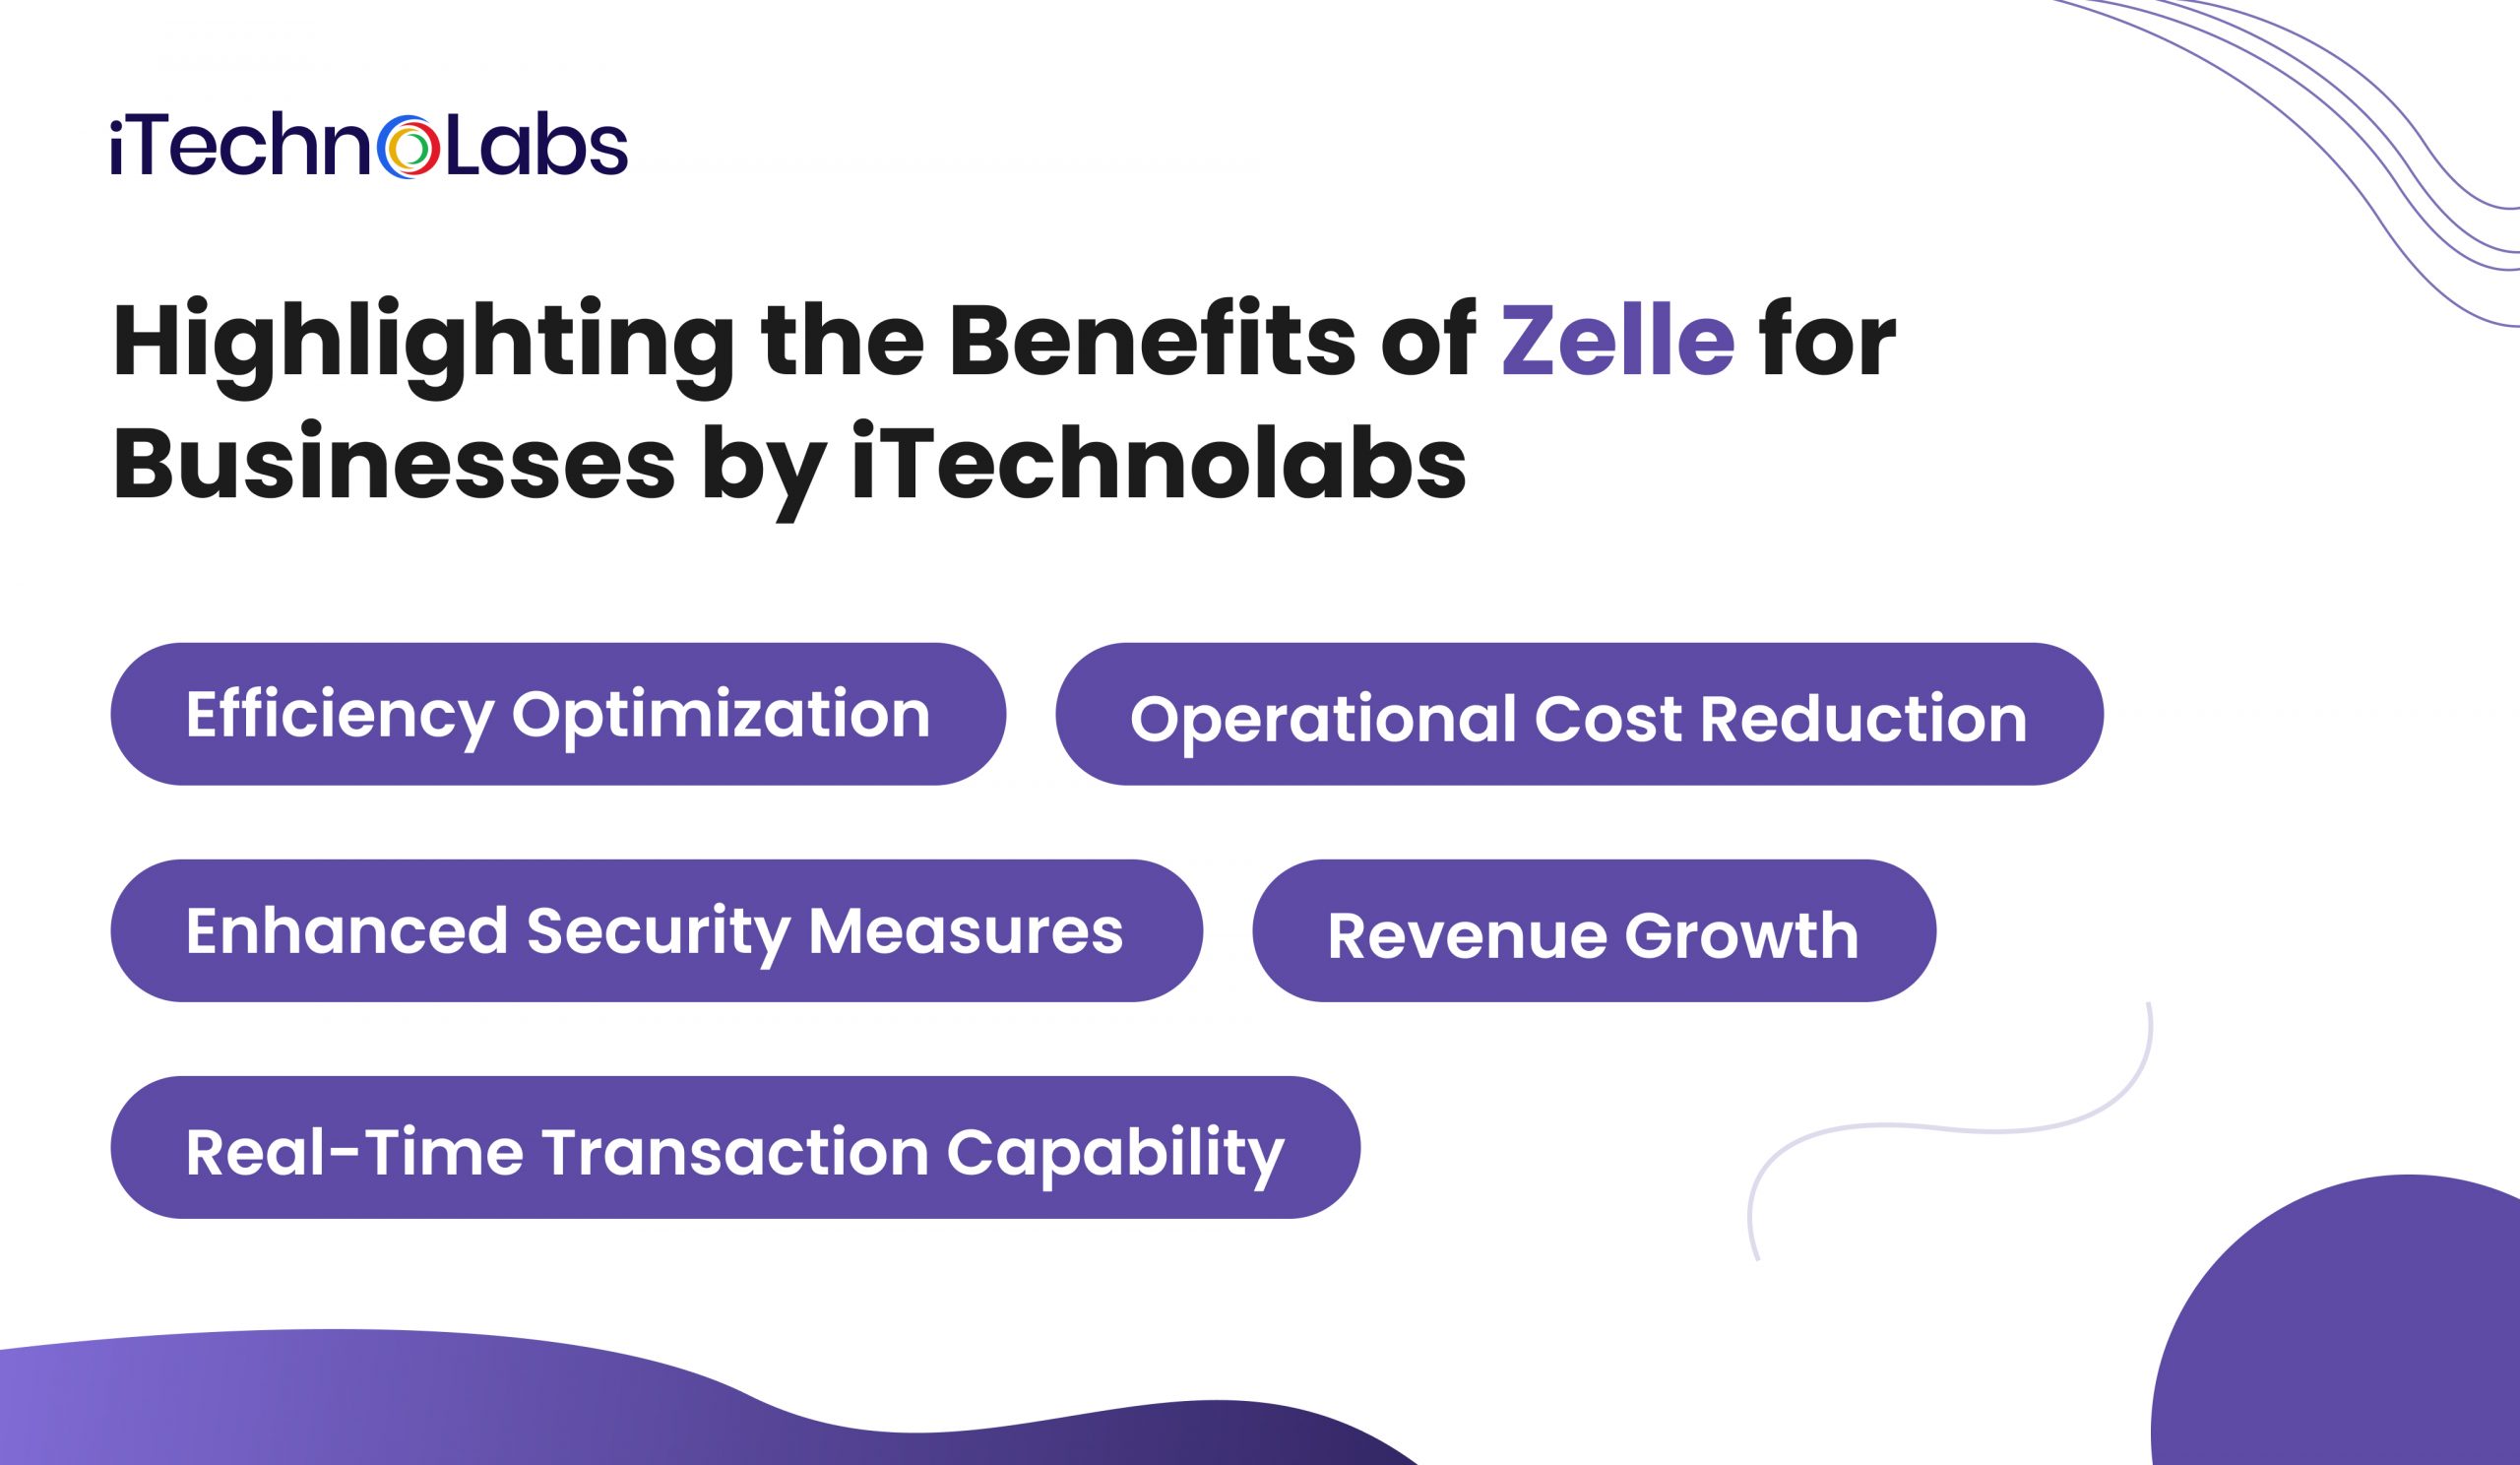 iTechnolabs-Highlighting the Benefits of Zelle for Businesses by iTechnolabs